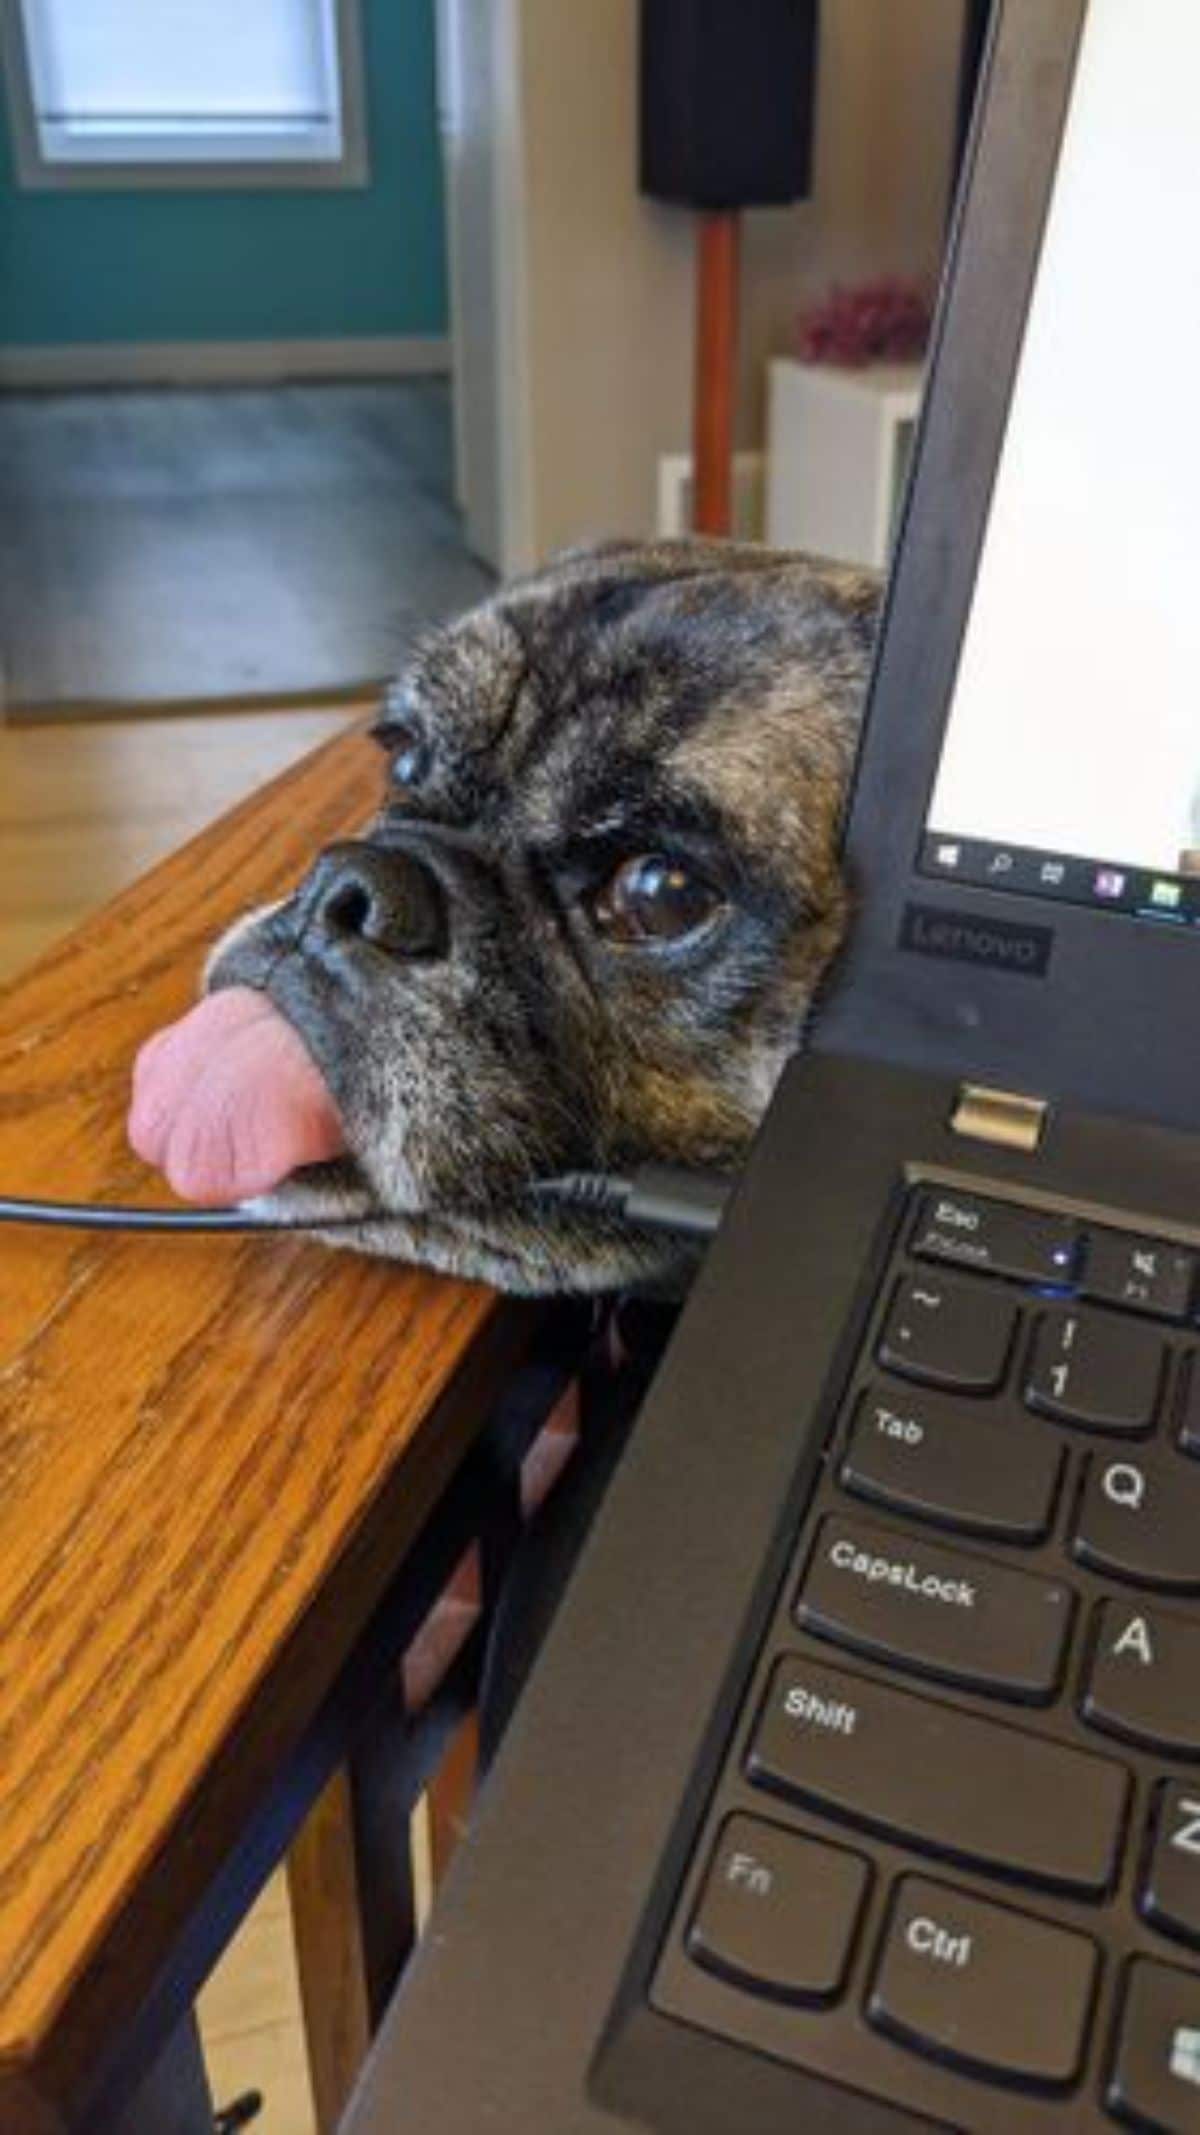 black and brown brindle dog's head peeking from behind a black laptop and the dog is sticking its tongue out